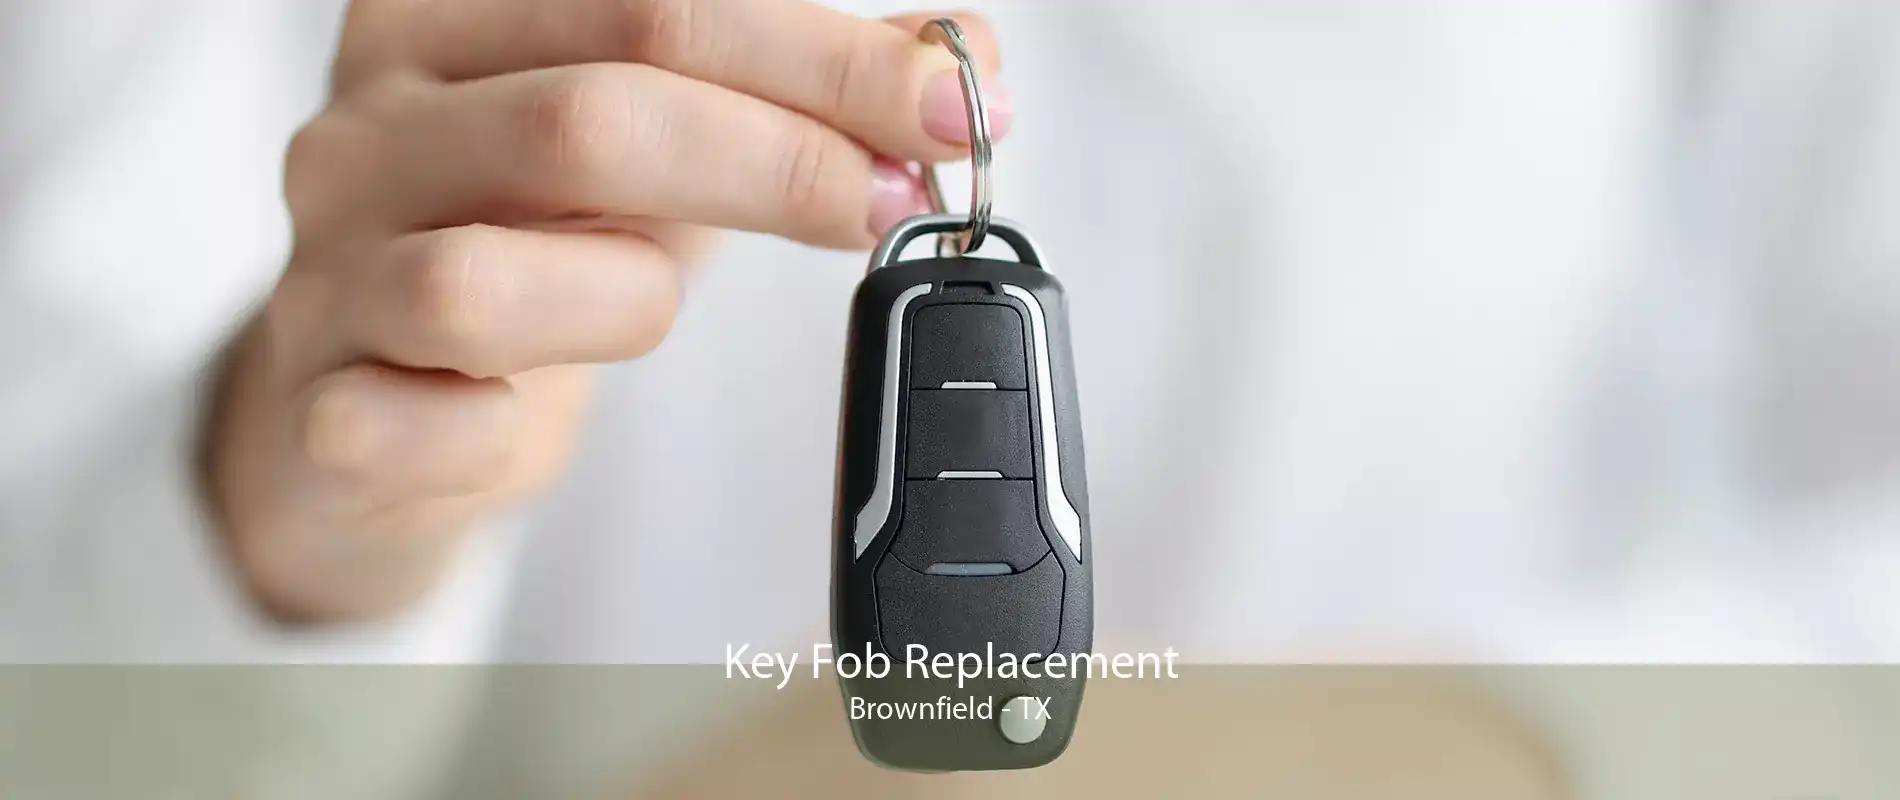 Key Fob Replacement Brownfield - TX